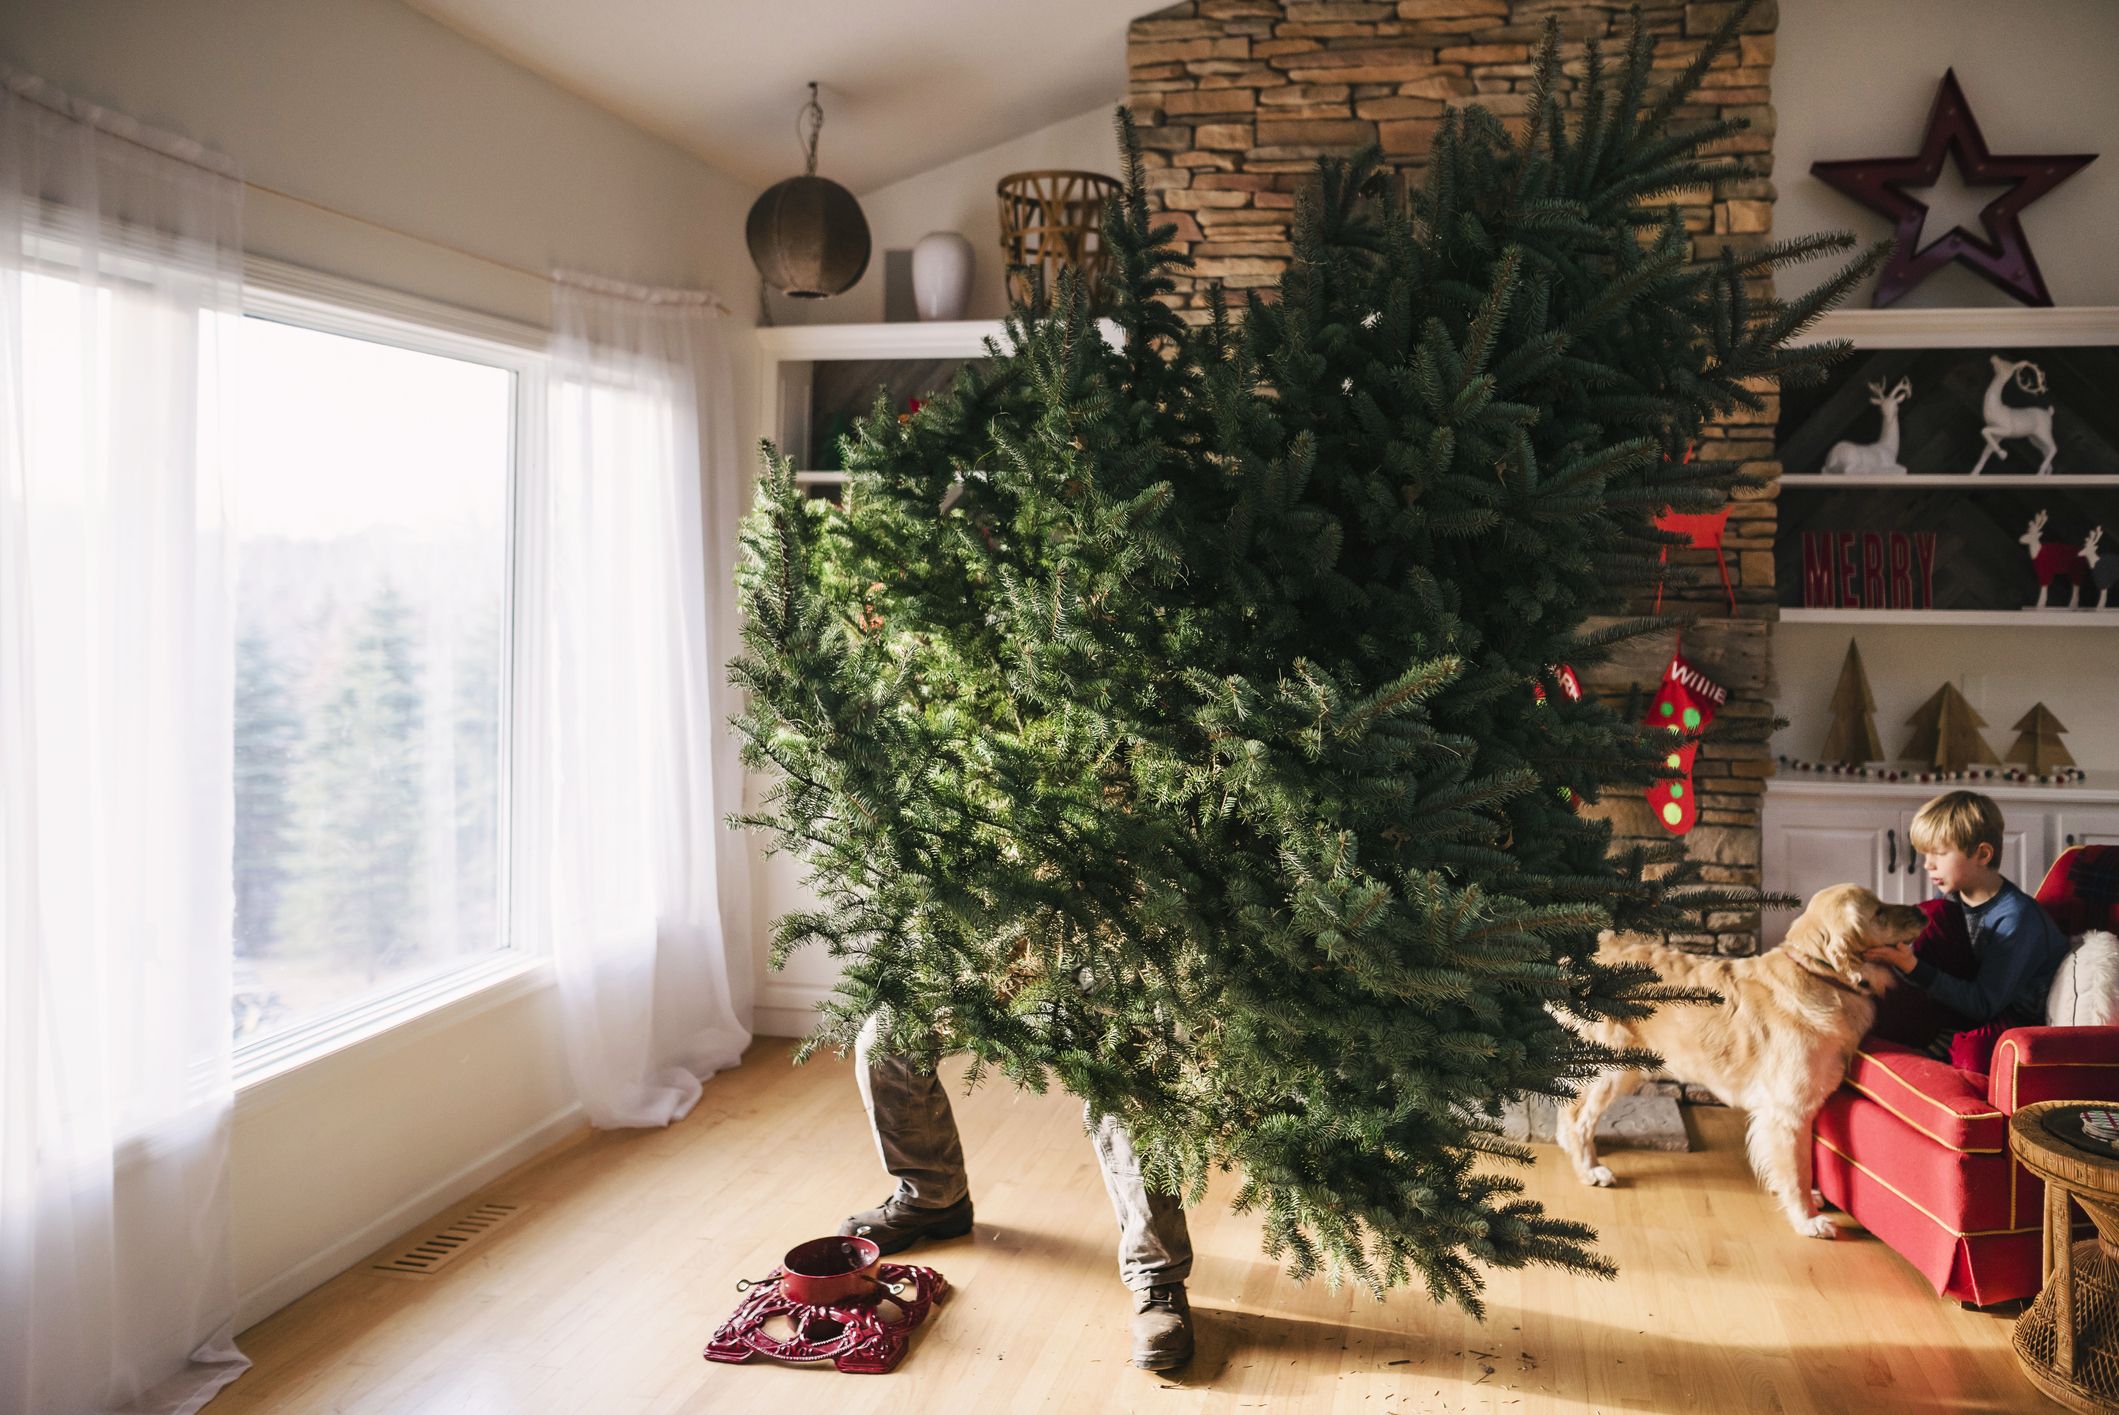 7 Christmas Tree Delivery Services - Buy a Christmas Tree Online